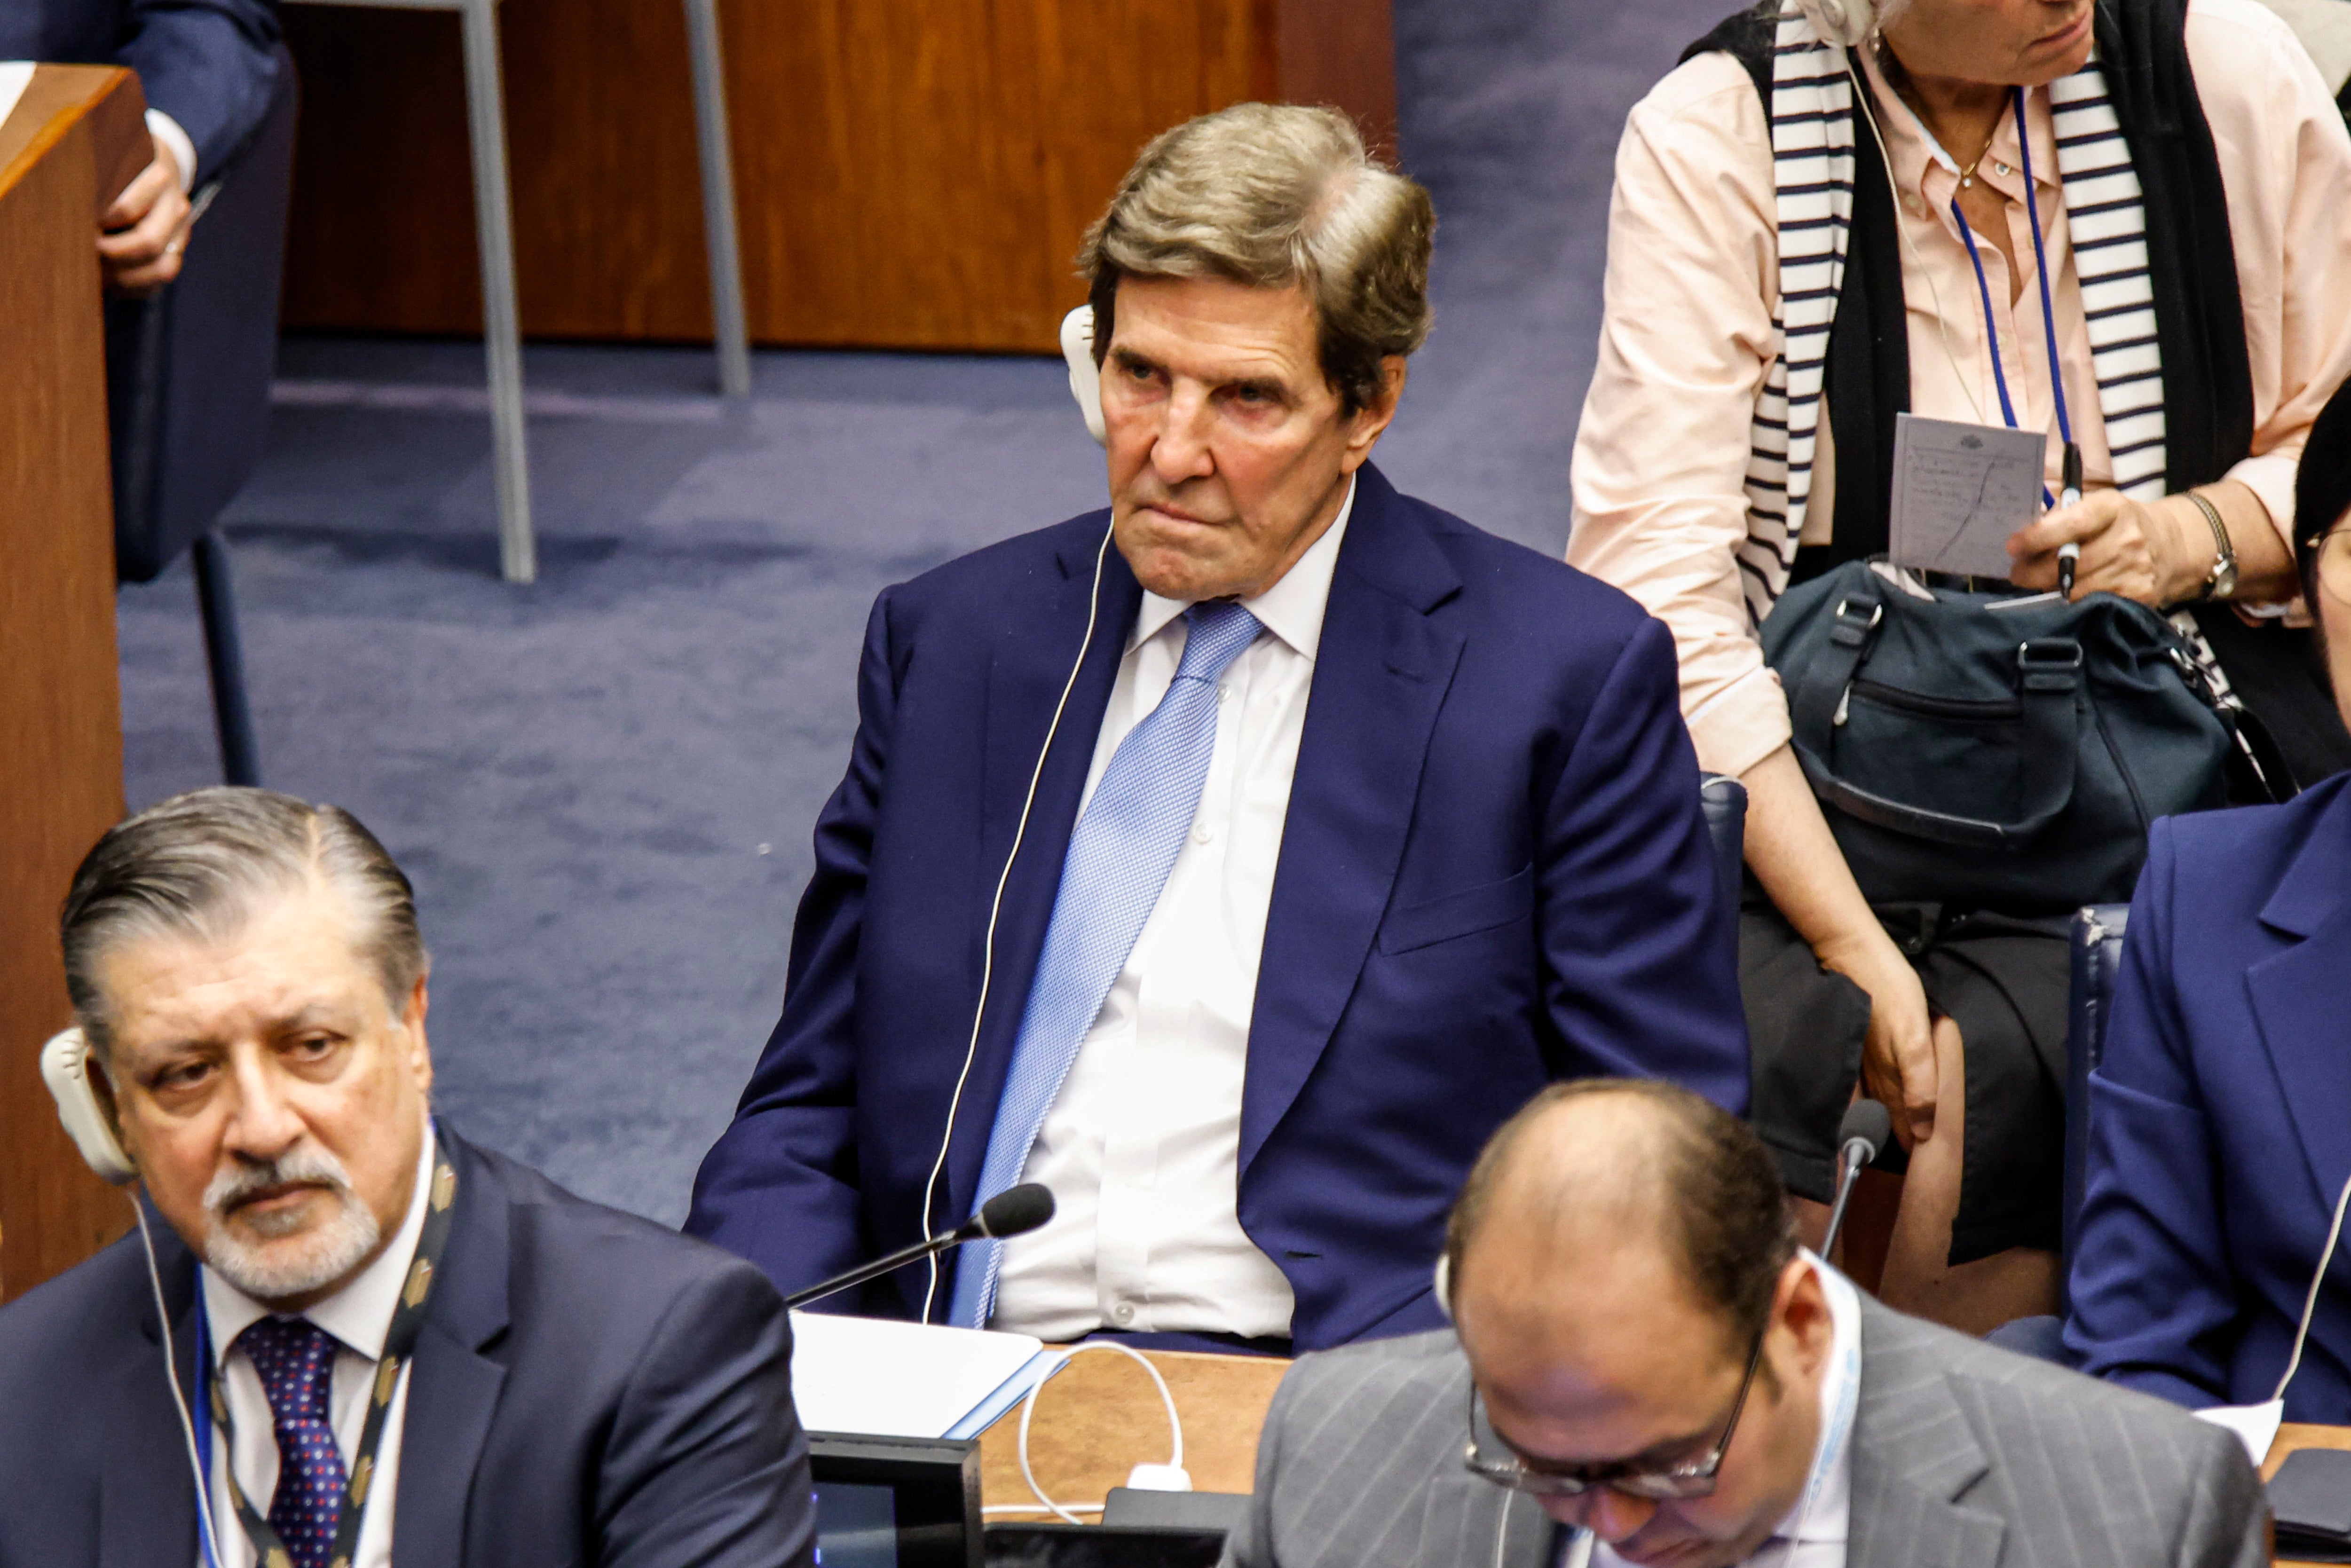 US Special Presidential Envoy for Climate John Kerry attended but did not speak at the Climate Ambition Summit at the UN Headquarters on September 20, 2023 in New York City